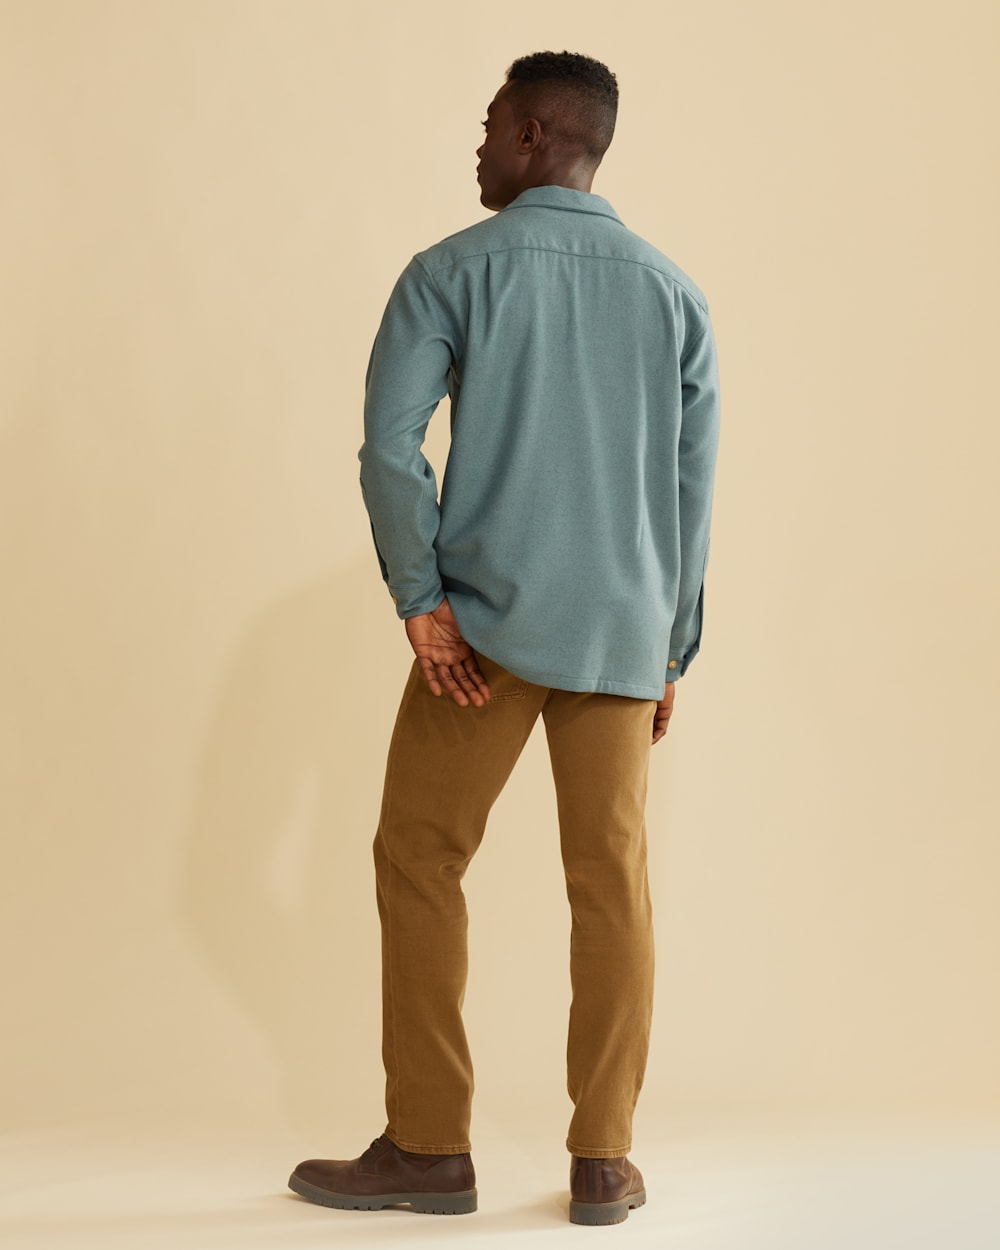 ALTERNATE VIEW OF MEN'S BOARD SHIRT IN DUSTY BLUE image number 3